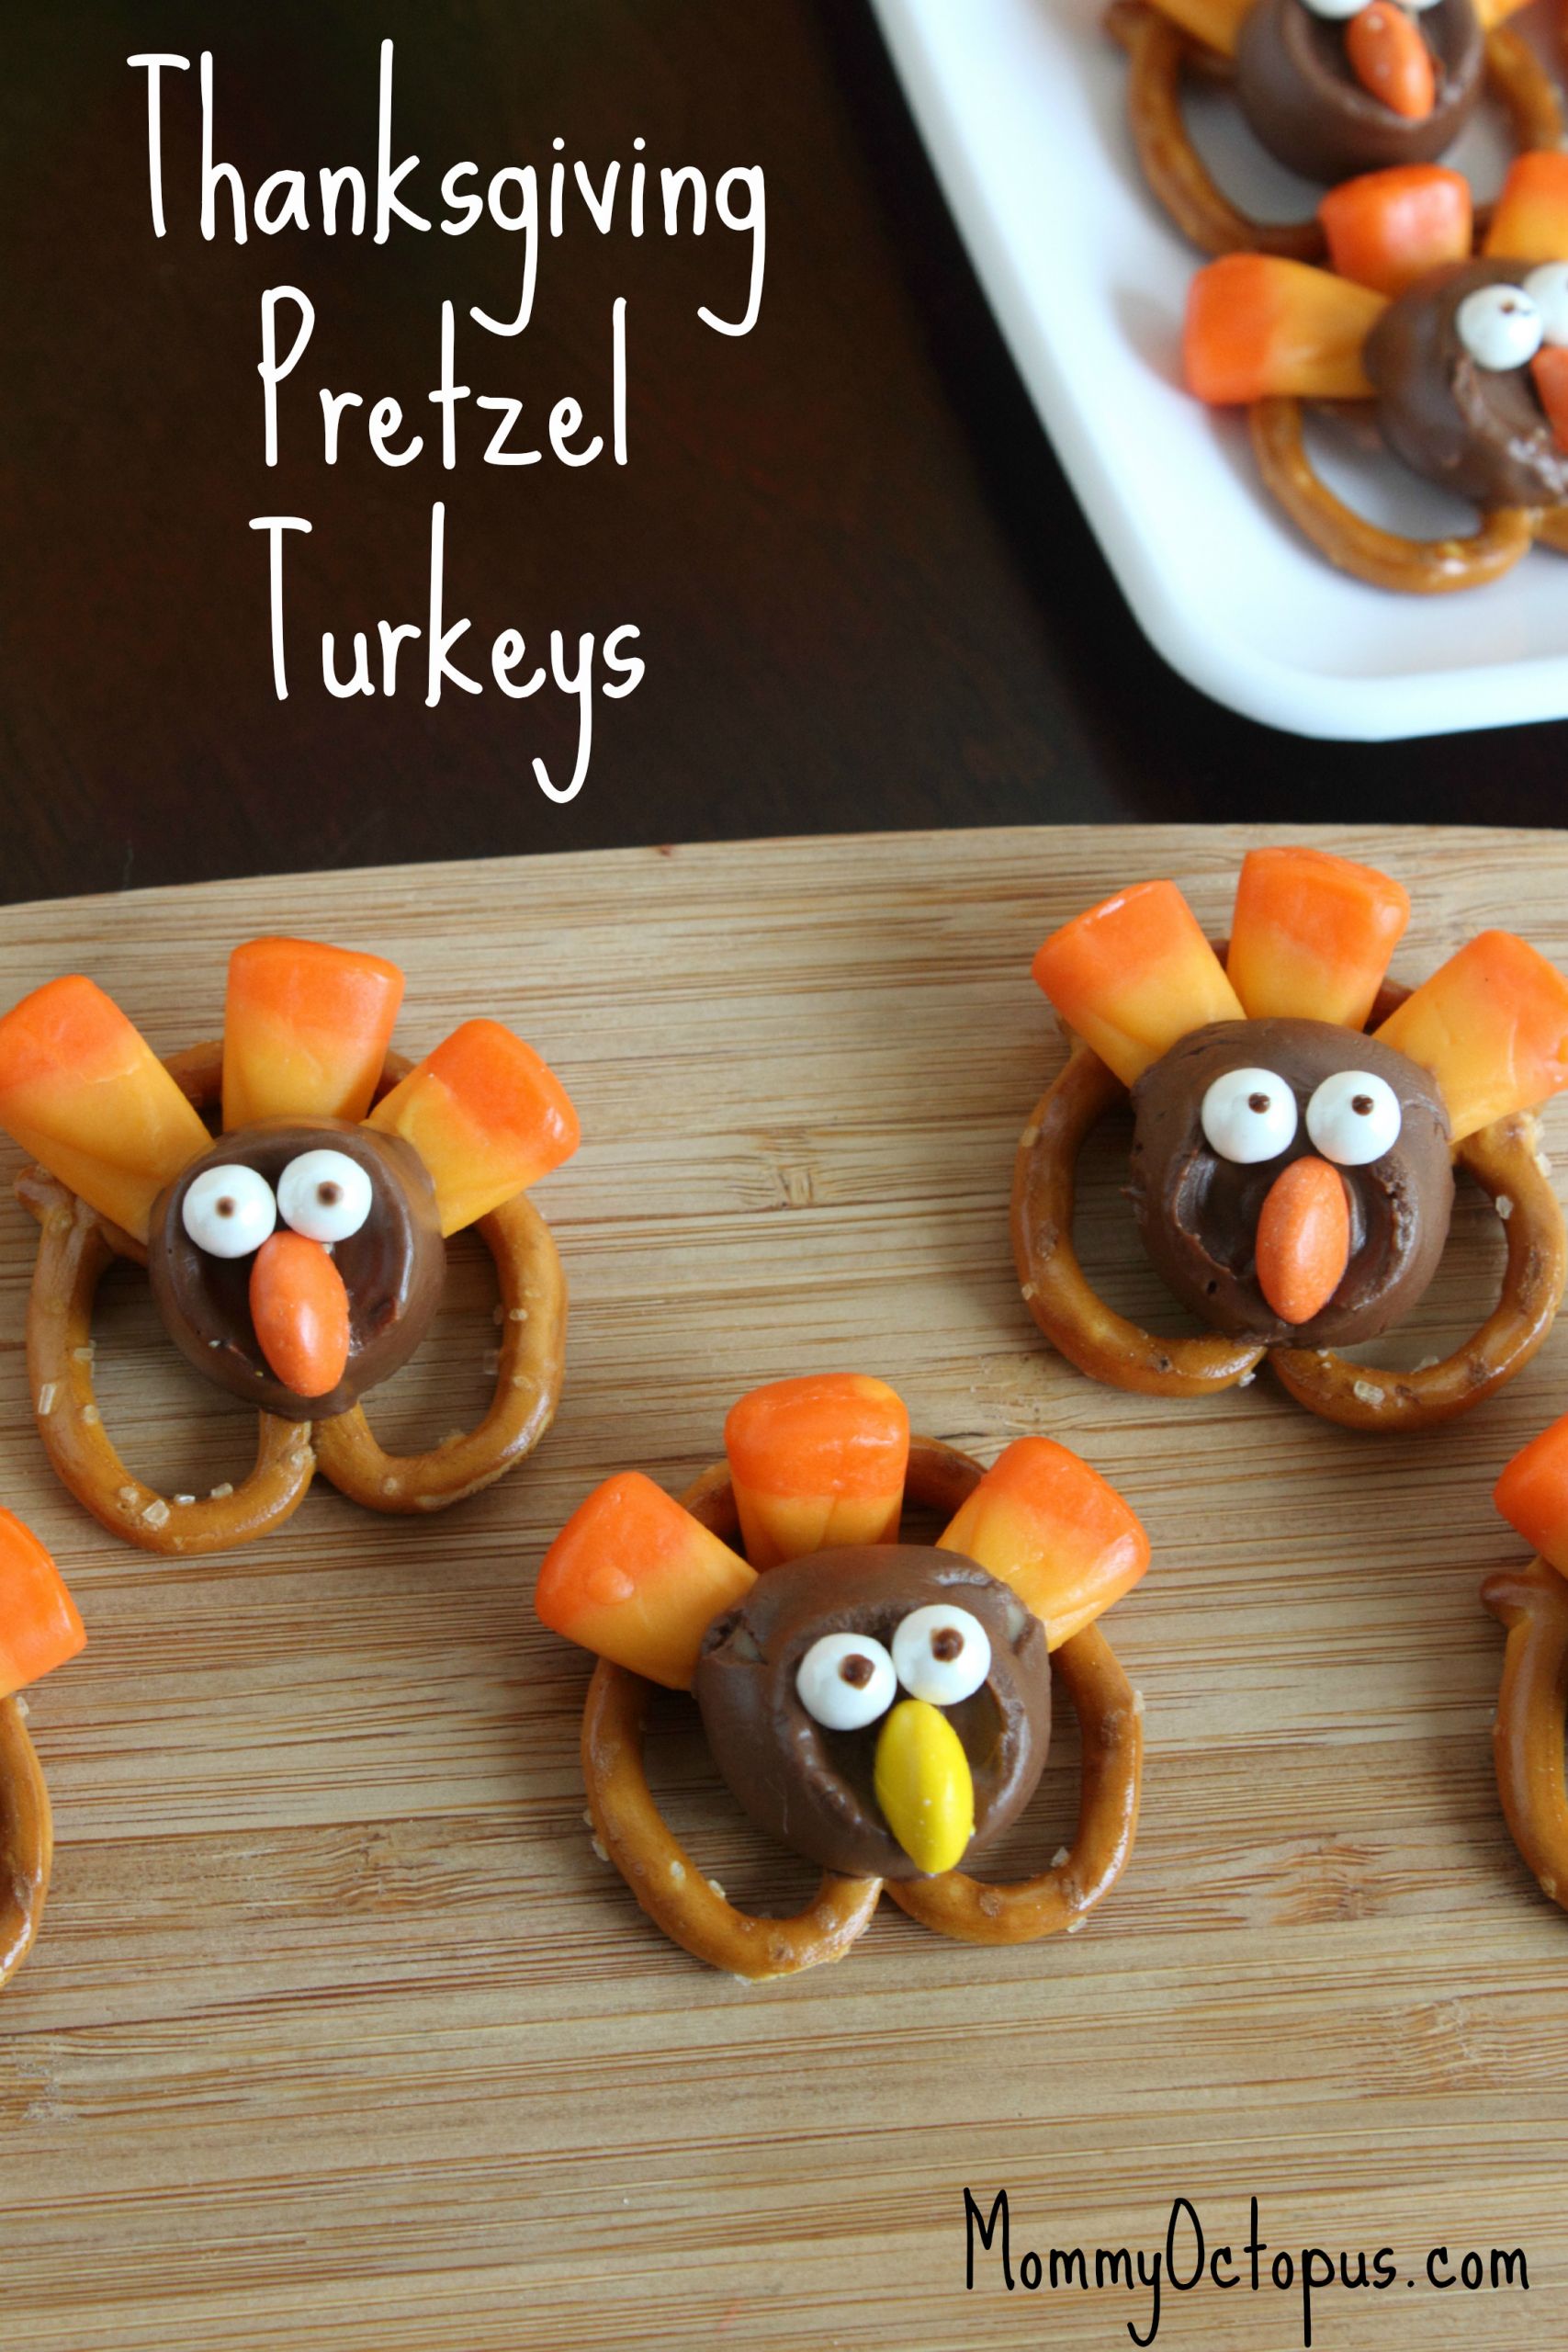 Thanksgiving Turkey Desserts
 Thanksgiving Desserts That You And Your Kids Will Both Love